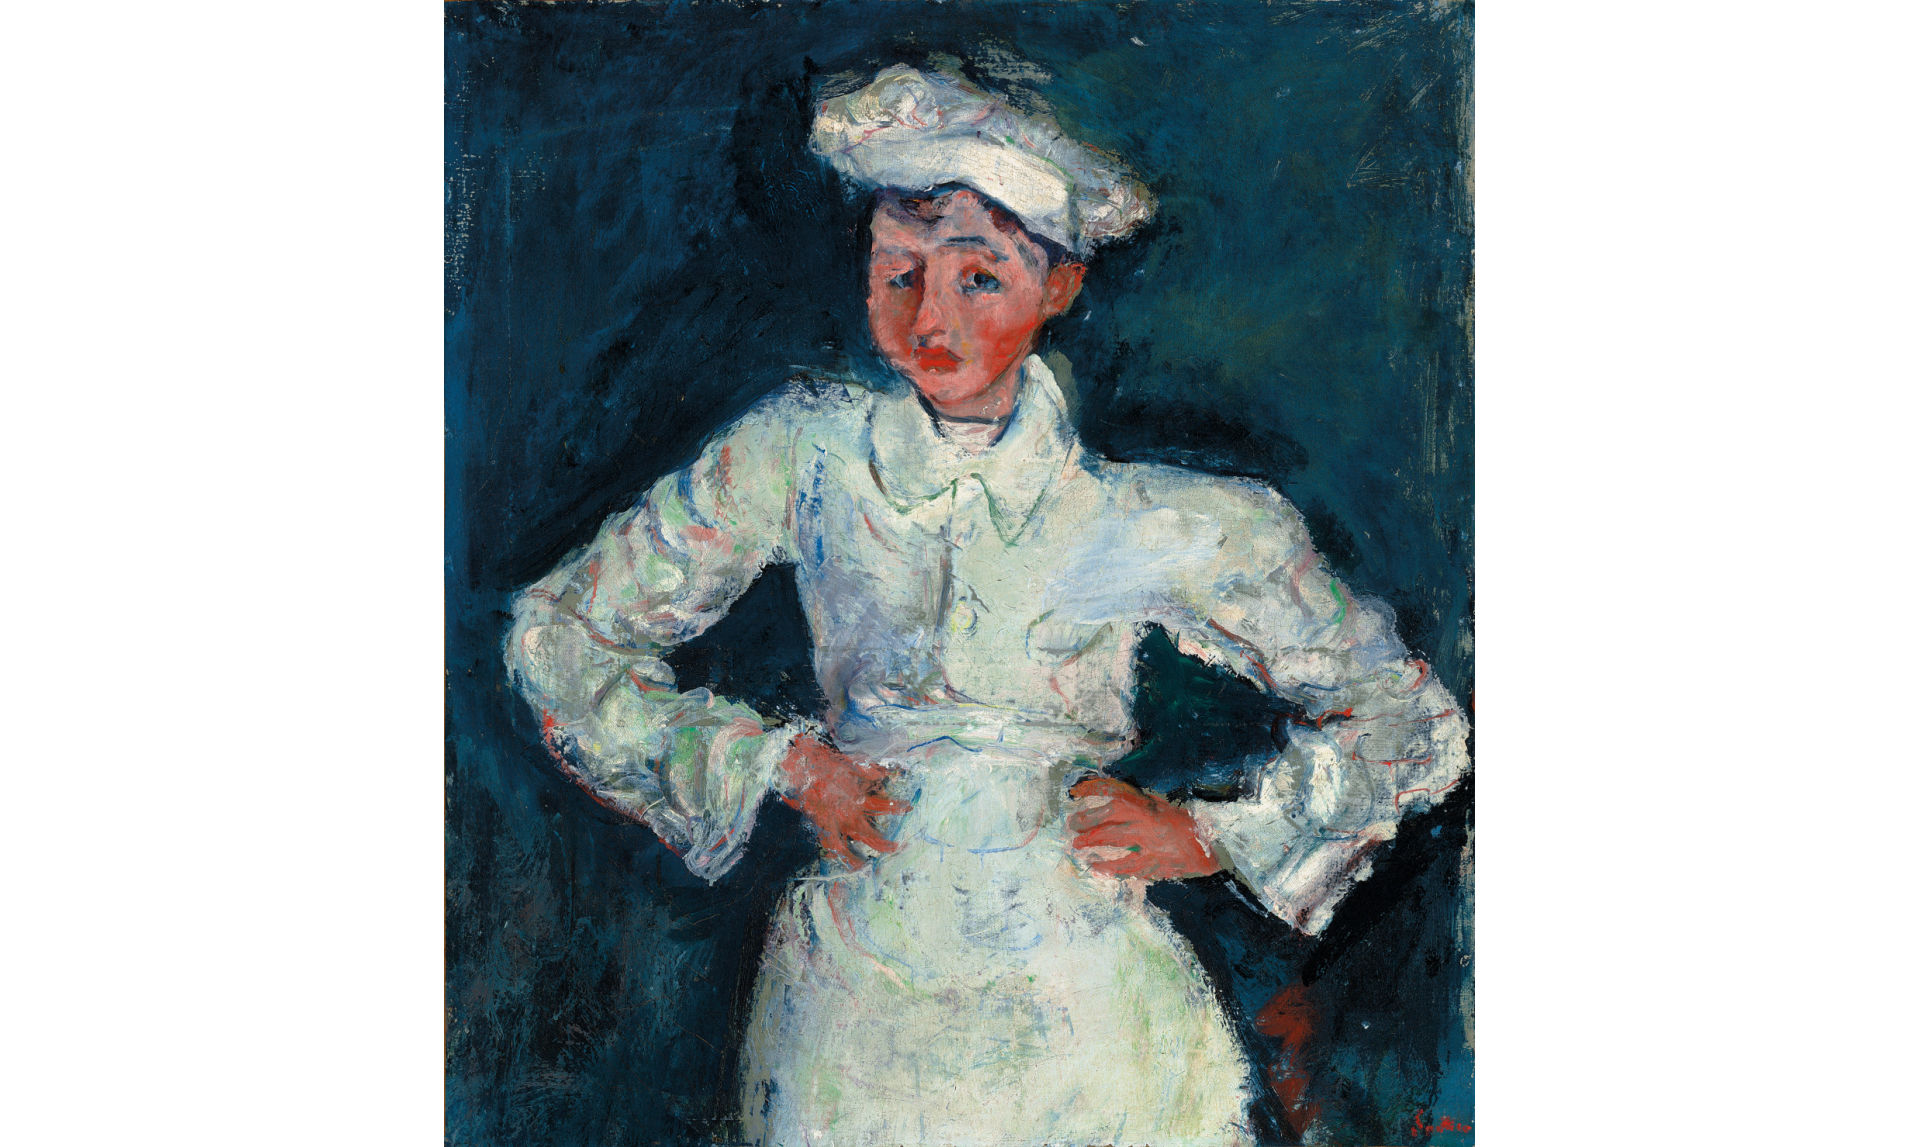 Two artists who broke the rules: Soutine | Kossoff, at Hastings Contemporary, reviewed